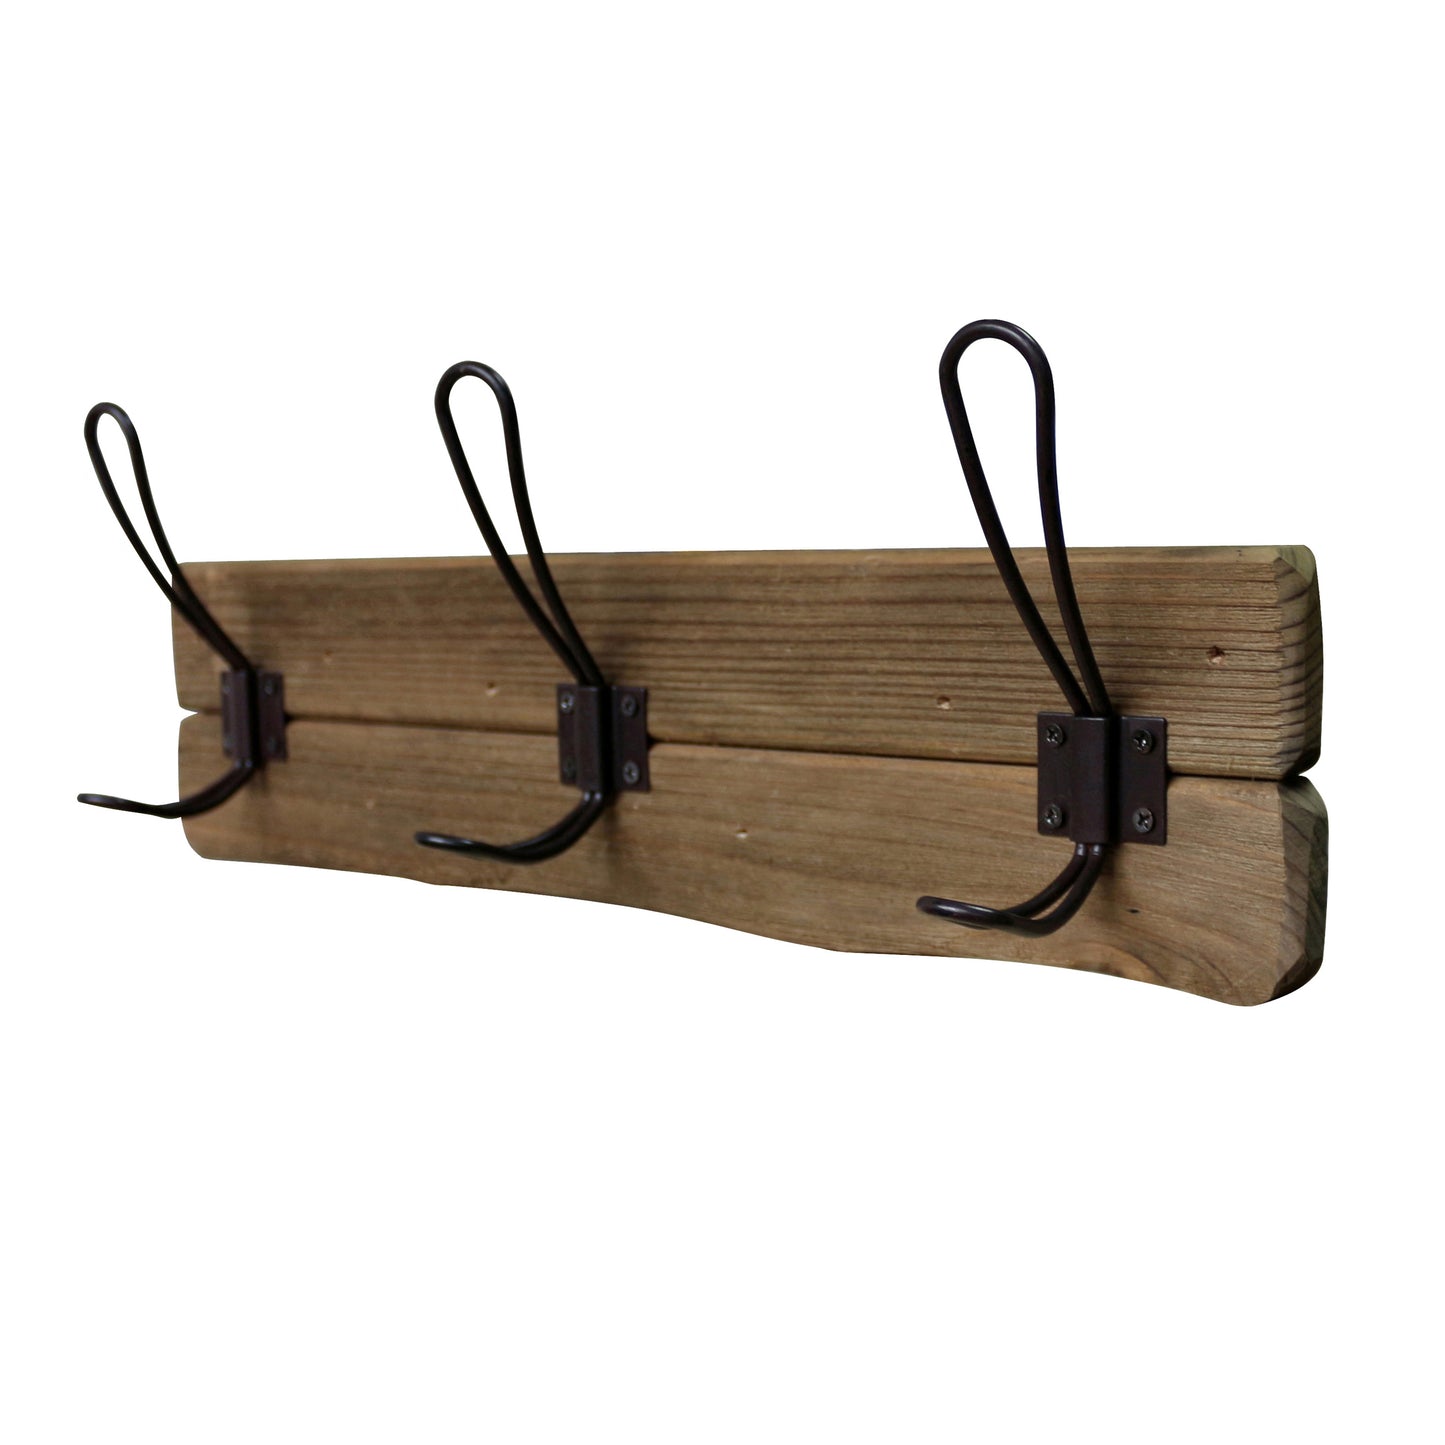 CVHOMEDECO. Rustic Solid Wood Wall Mounted Coat Rack with 3 Double Hooks Primitives Wooden Coat Hooks for Entryway, Kitchen, Bathroom. Brown.